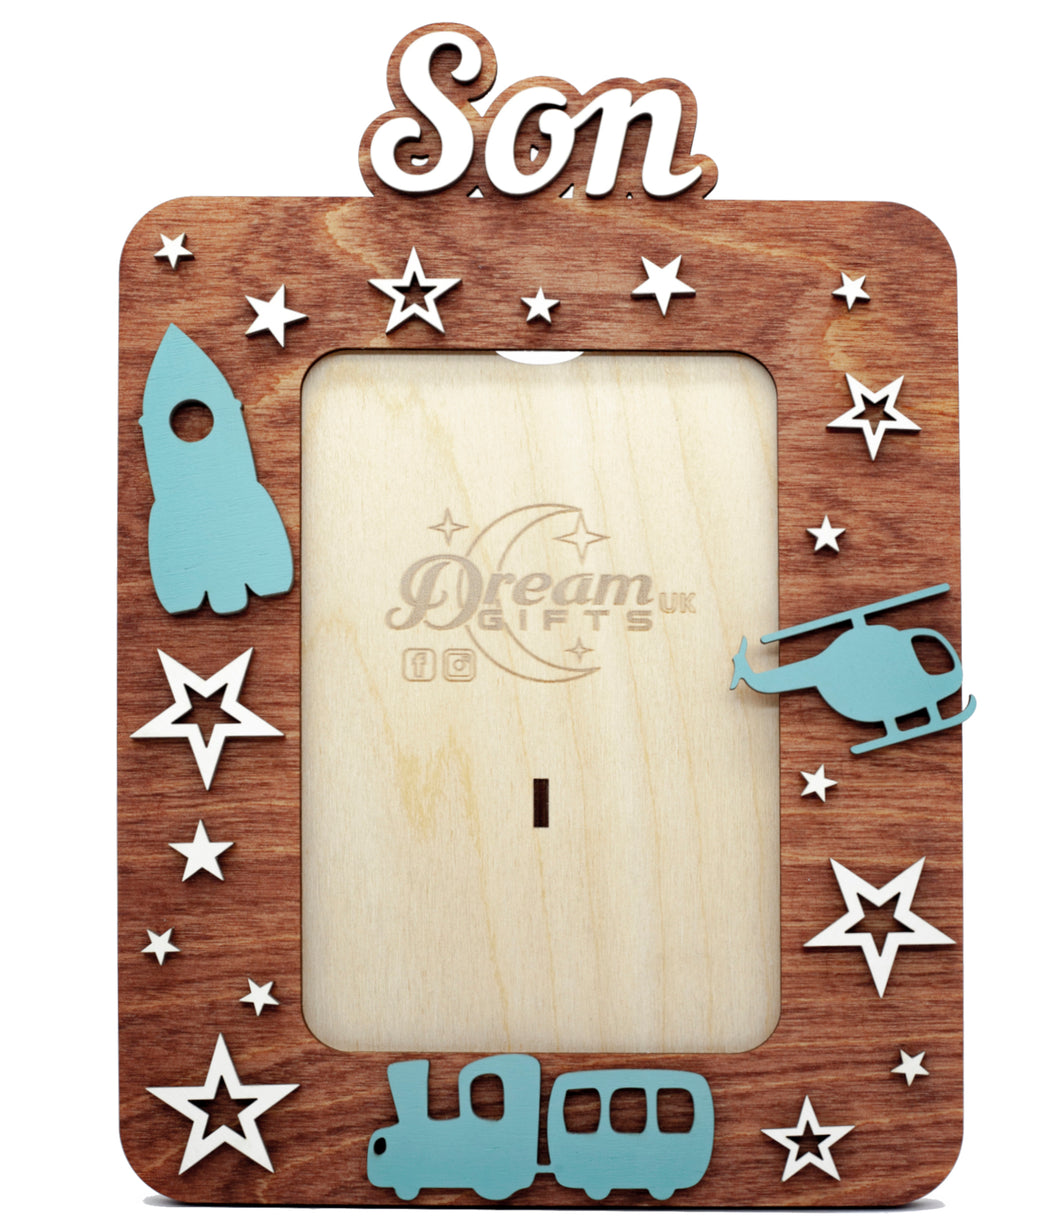 Son Baby Wooden Photo Frame Handmade for Tabletop or Wall Decorative Gift Idea - babycomfort.co.uk